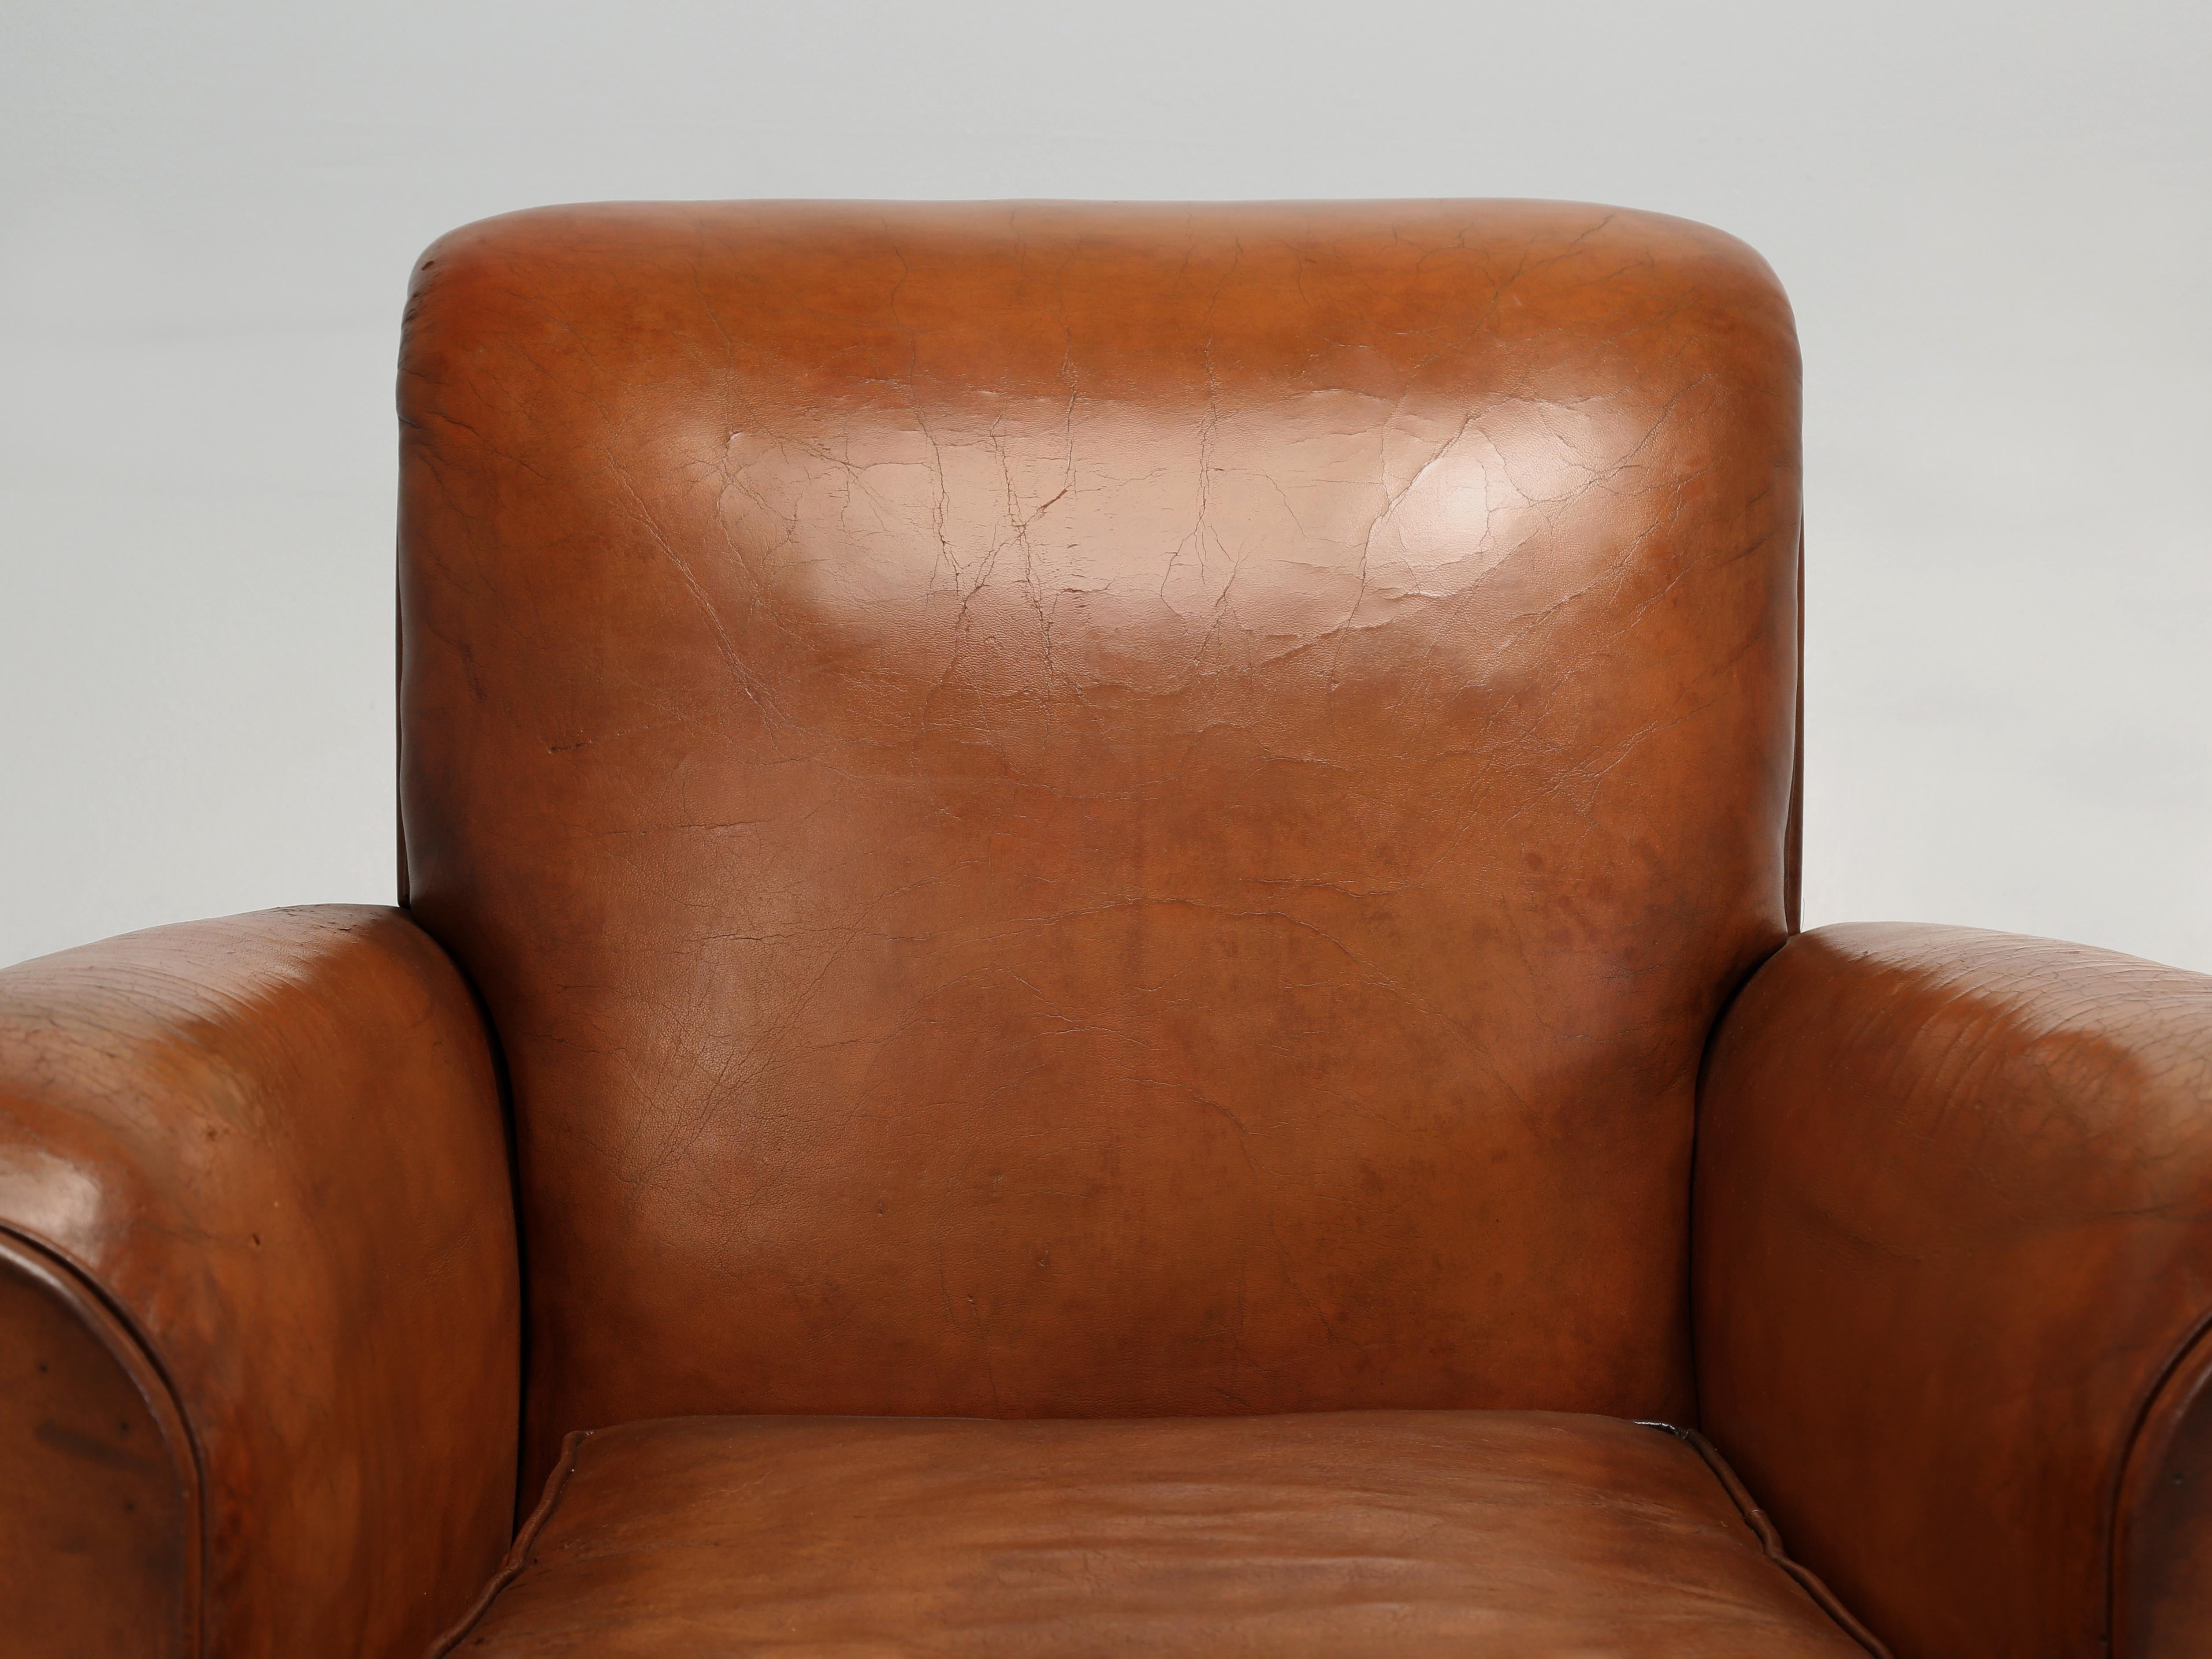 French Leather Club Chairs from the Art Deco Period. We purchased this matching pair of French Club Chairs outside of Toulouse, France and immediately upon their arrival, placed the Club Chairs into our Old Plank Upholstery Department for